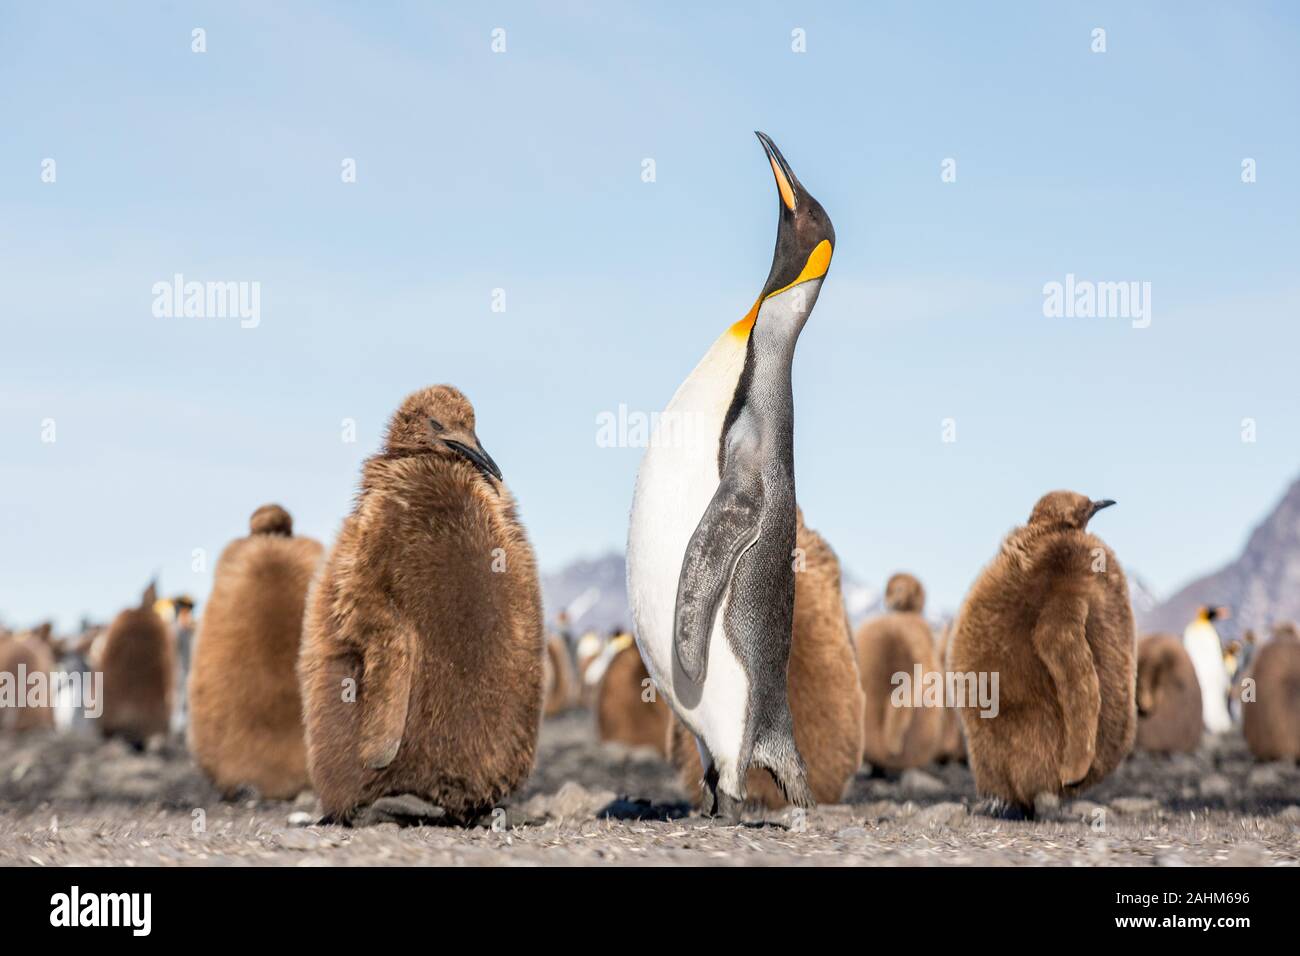 King Penguin and chicks in South Georgia, Antarctica Stock Photo